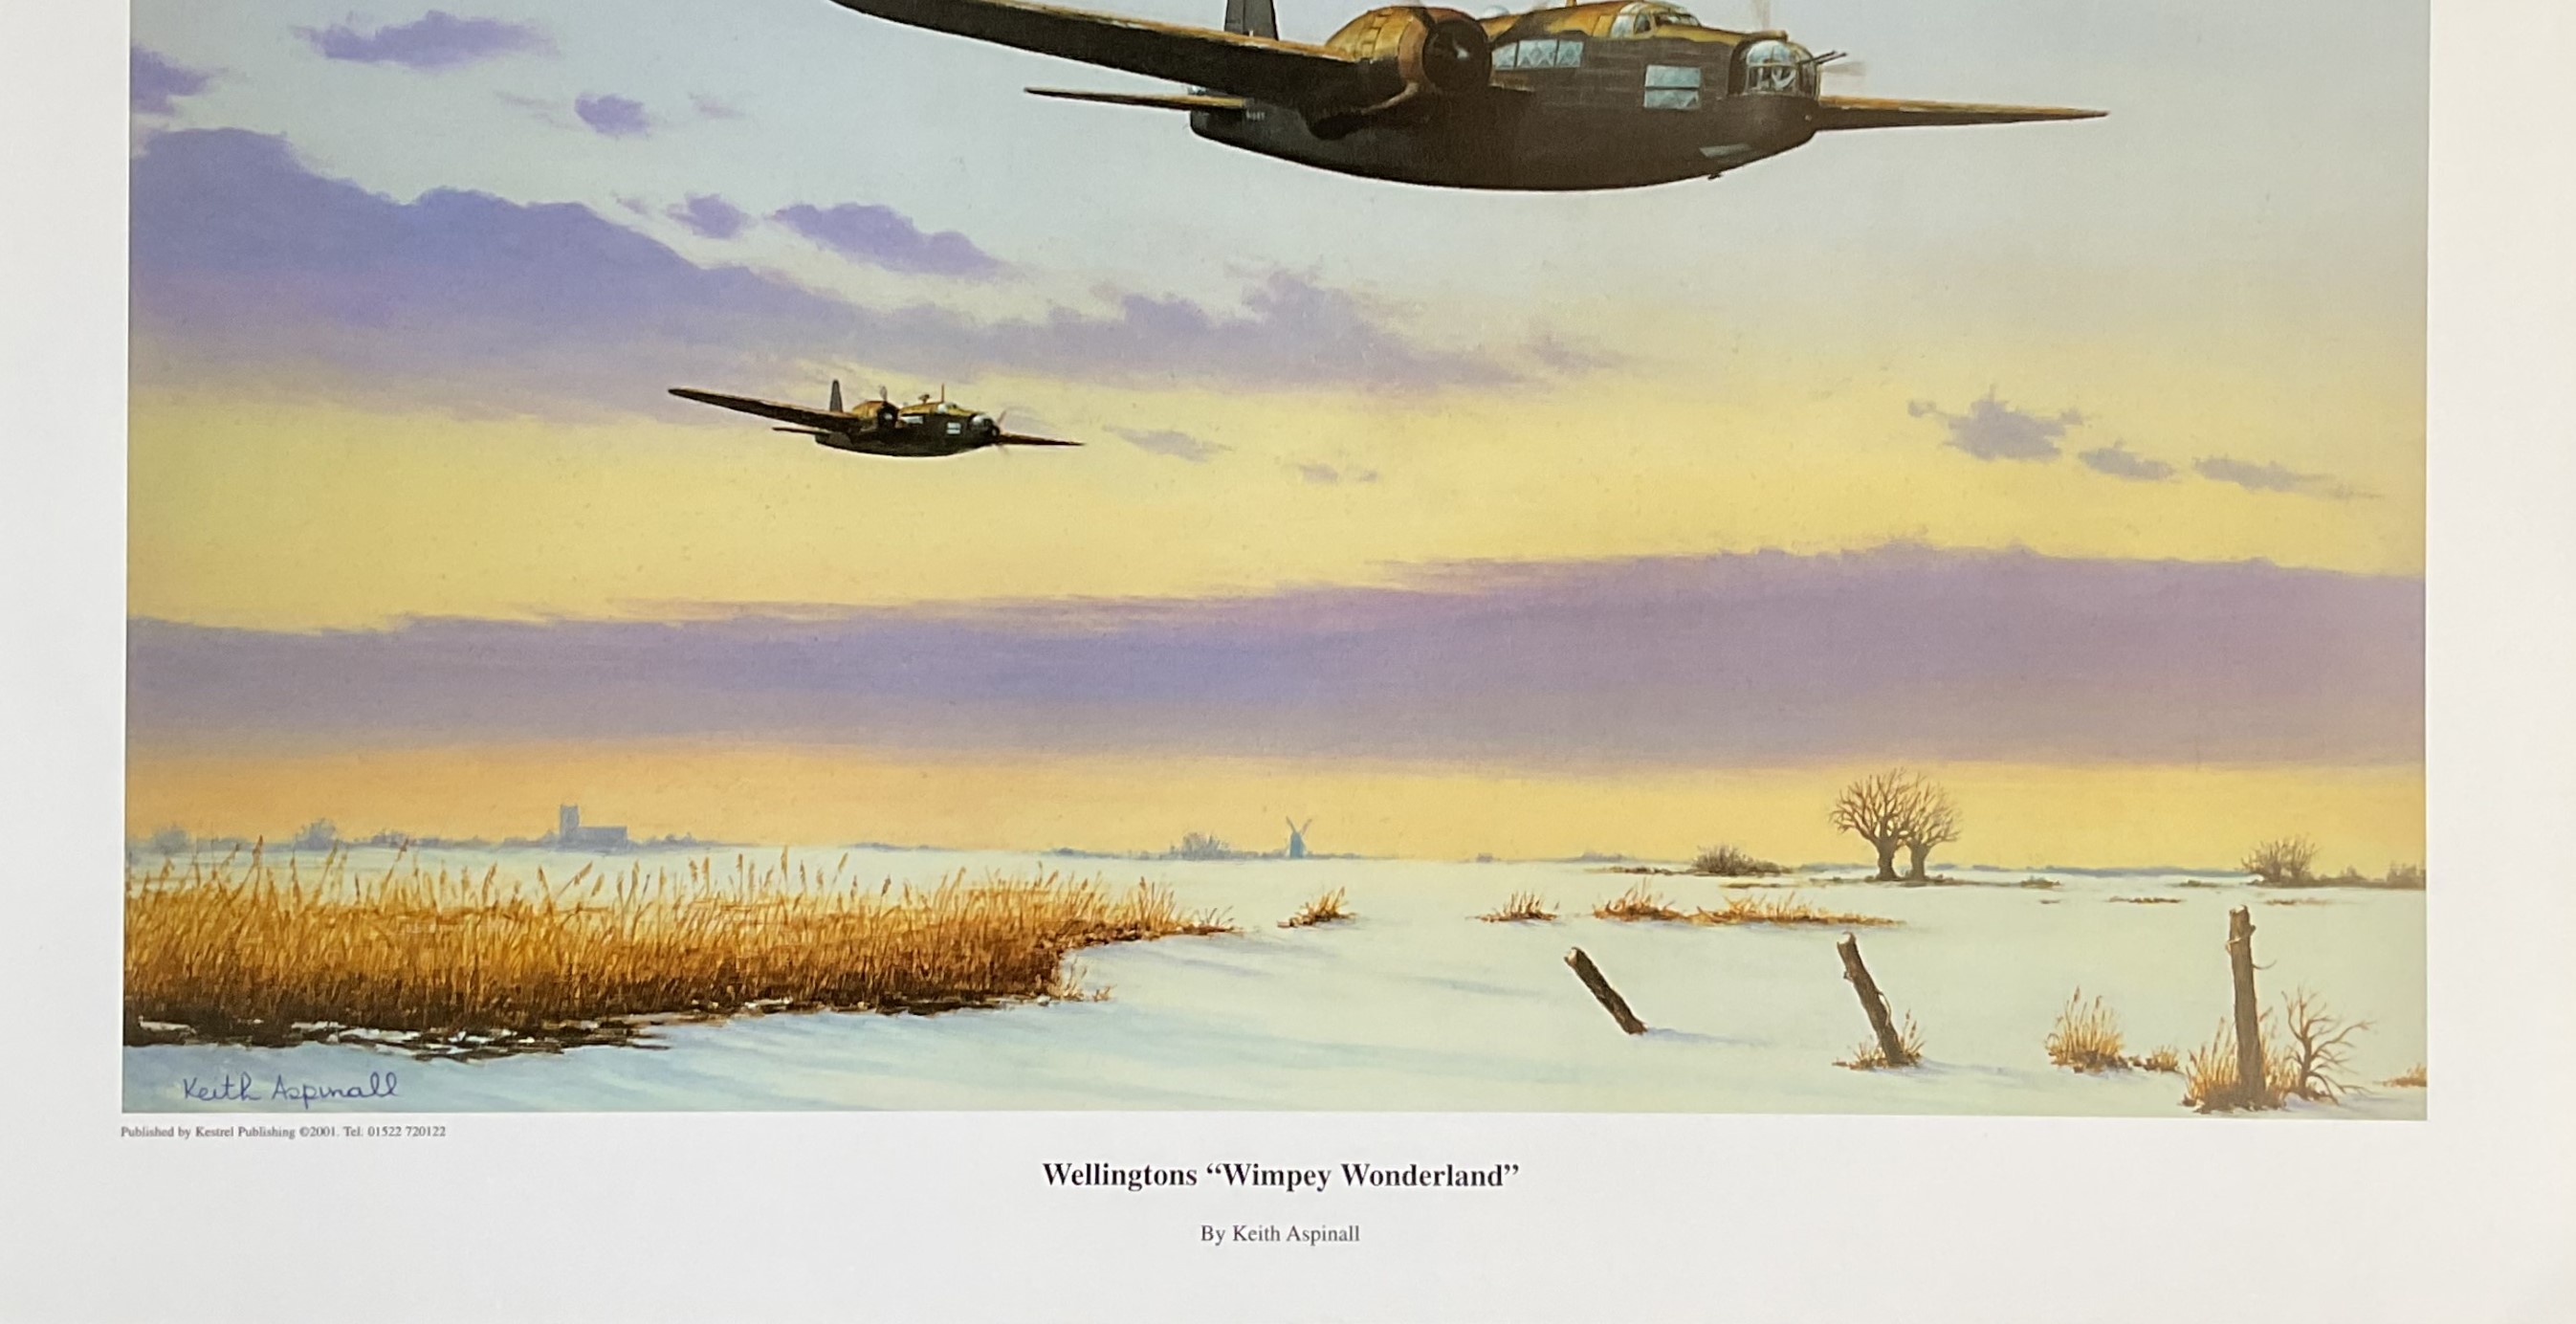 WW2 Colour Print Titled Wellingtons Whimpey Wonderland by Keith Aspinall. Measures 16x12 inches - Image 6 of 6